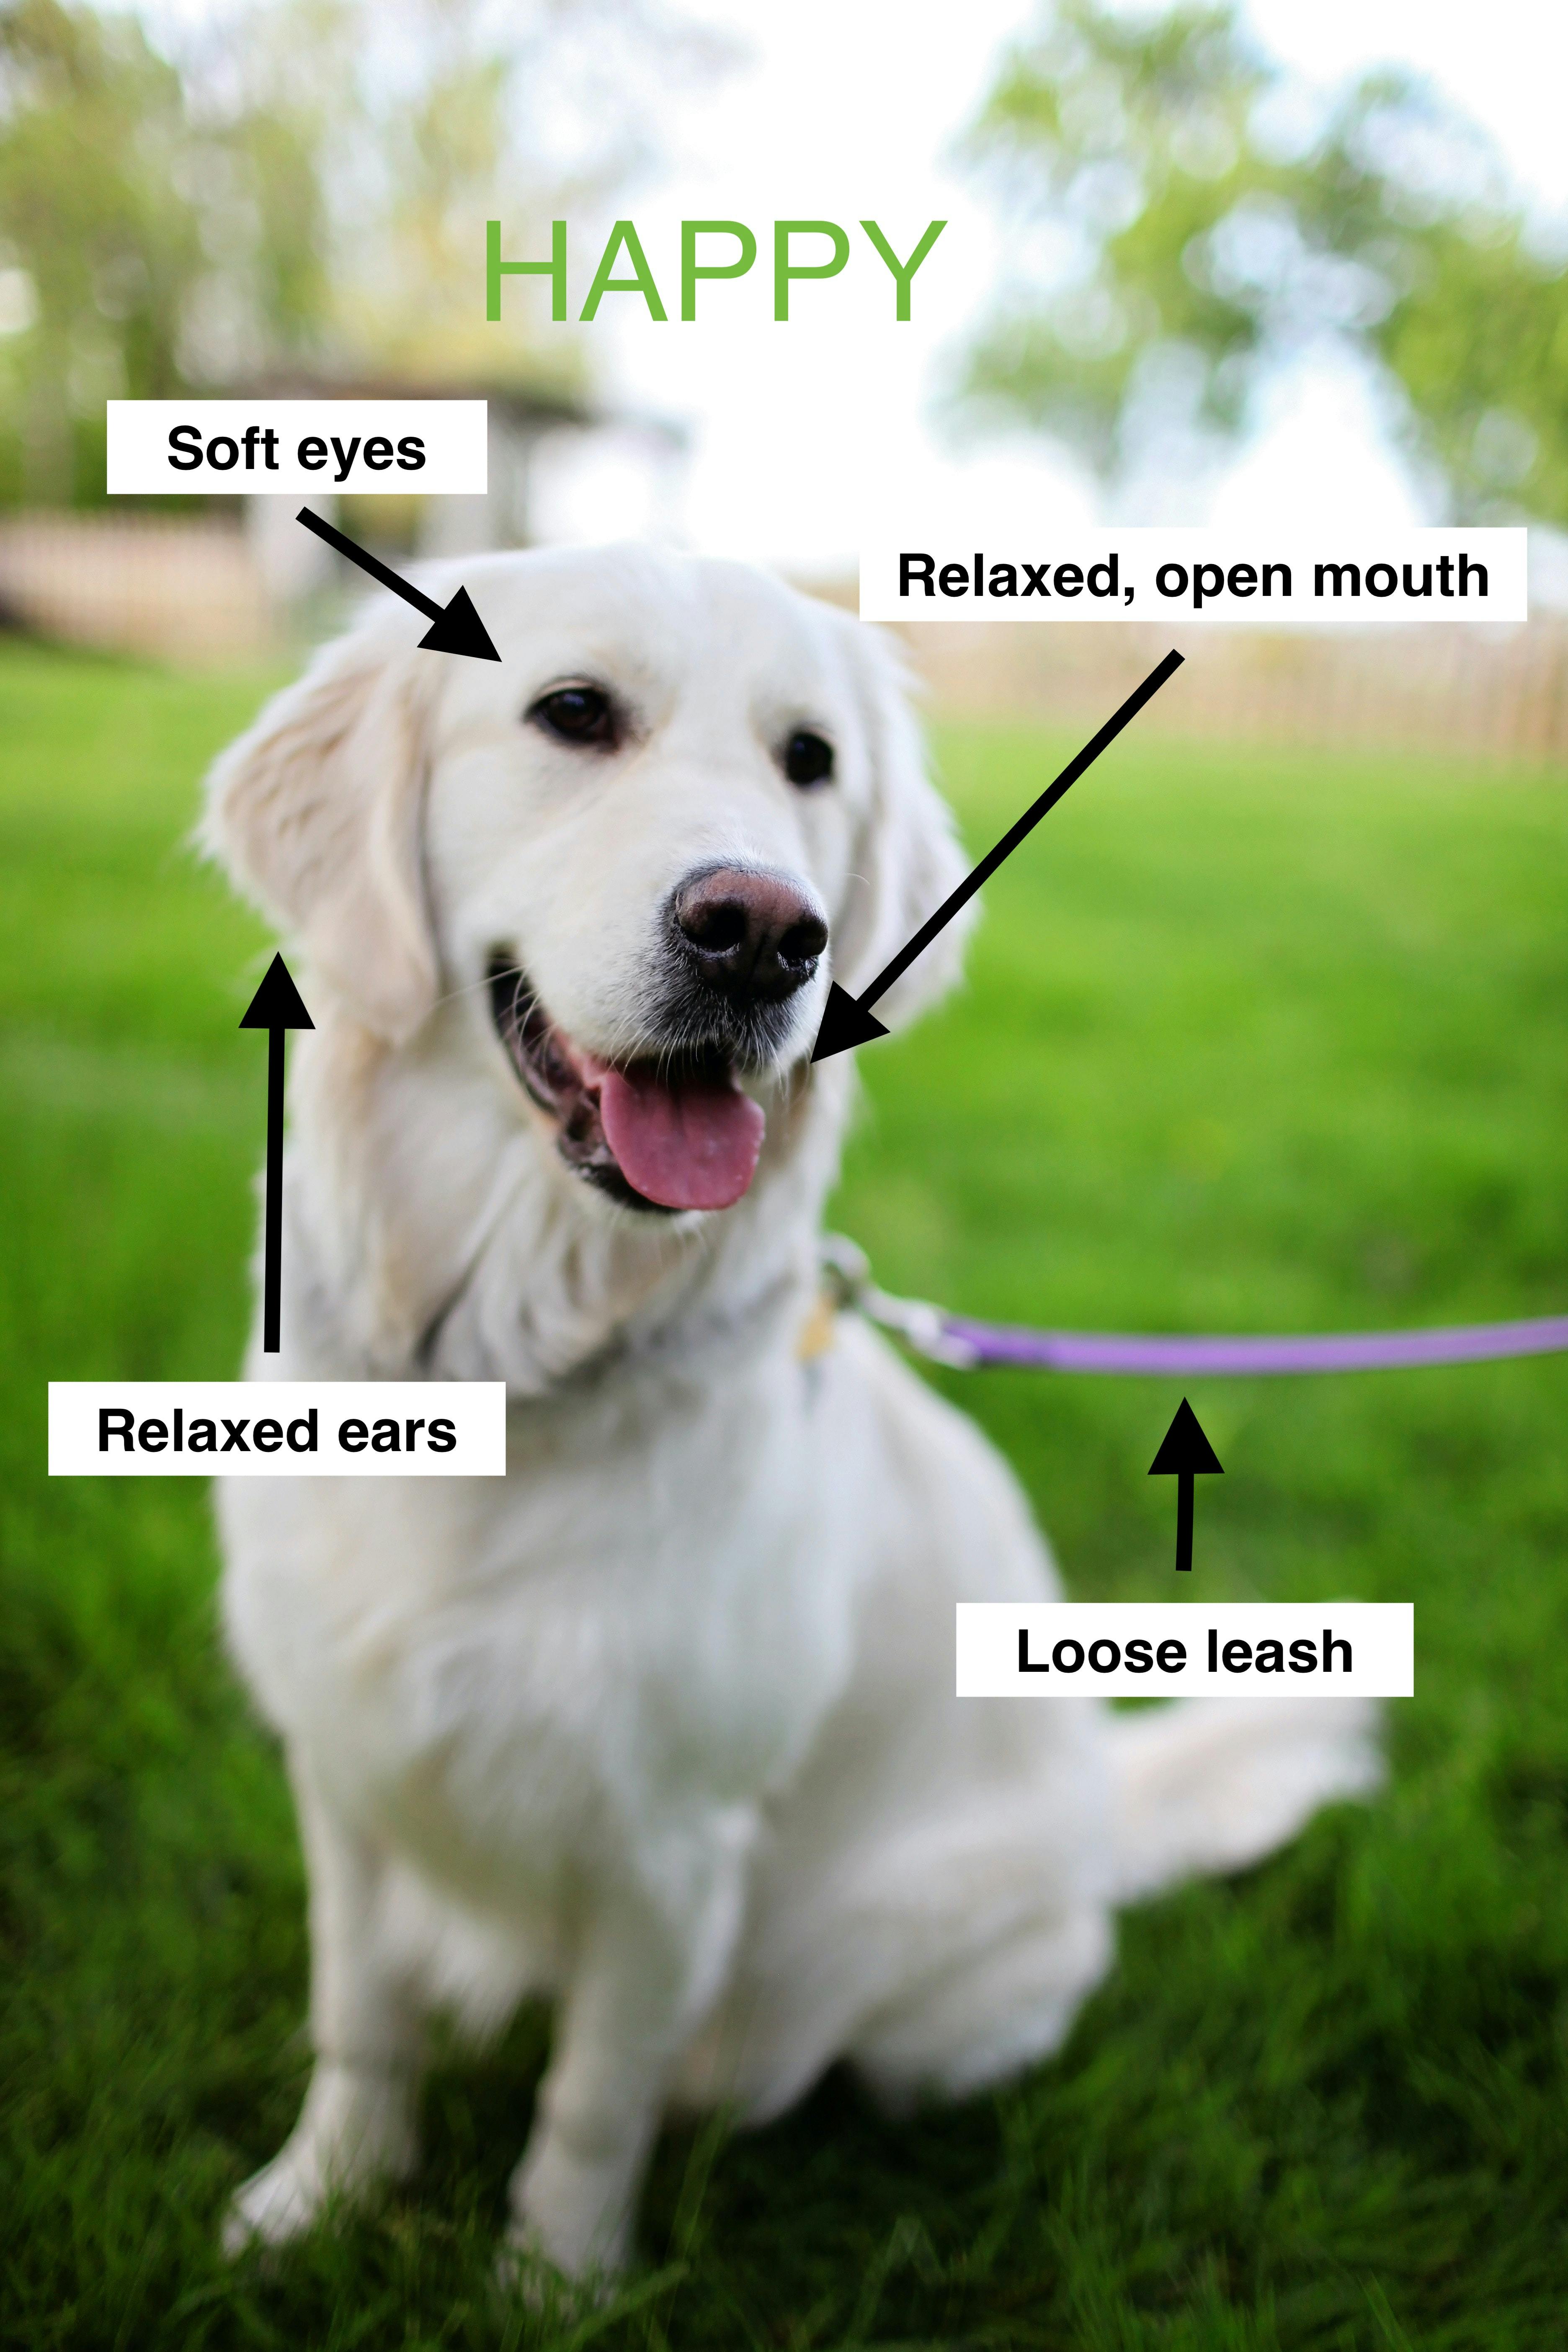 Words overlay an image of a happy dog, pointing out soft eyes, a relaxed mouth and ears, and a loose leash